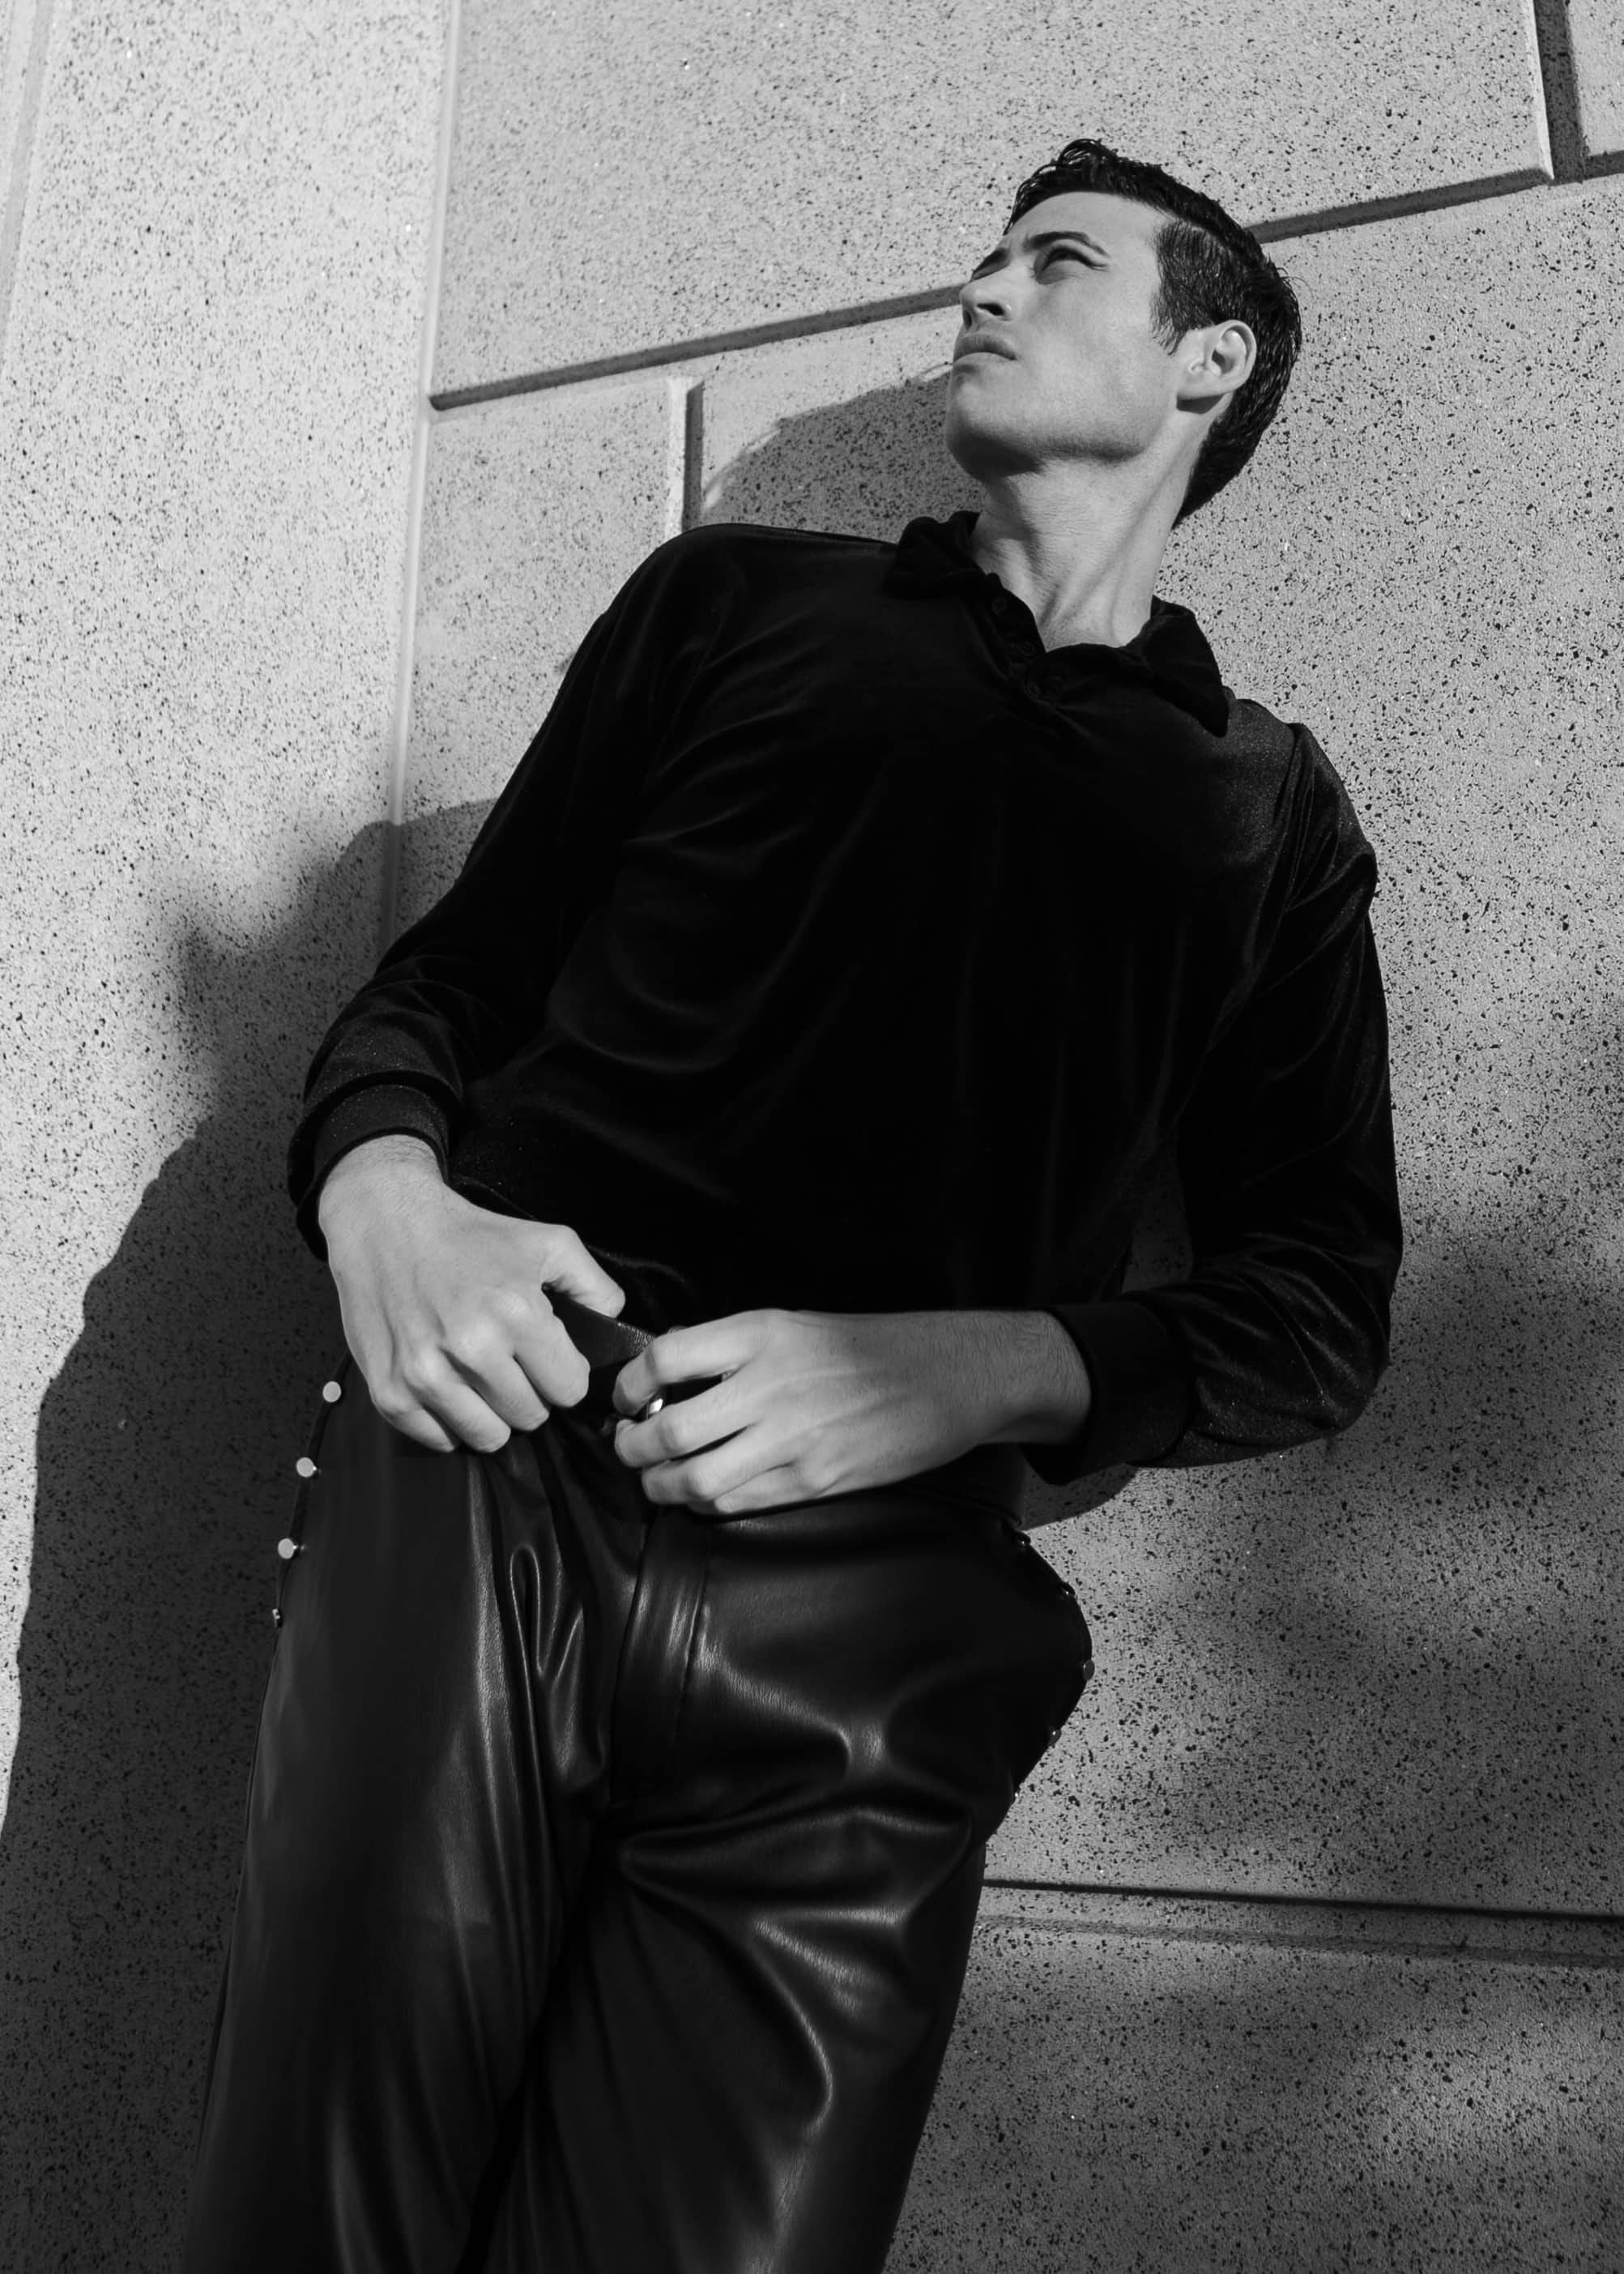 Actor Troy Bronson looking up to the right in a black and white photo, displaying a defined jaw, sleek haircut, and a pose reminiscent of the Hollywood golden age of cinema. He's wearing black leather pants and a velvet long-sleeve shirt, his thumbs hooked into his belt loops, giving an appearance similar to a sculpture.